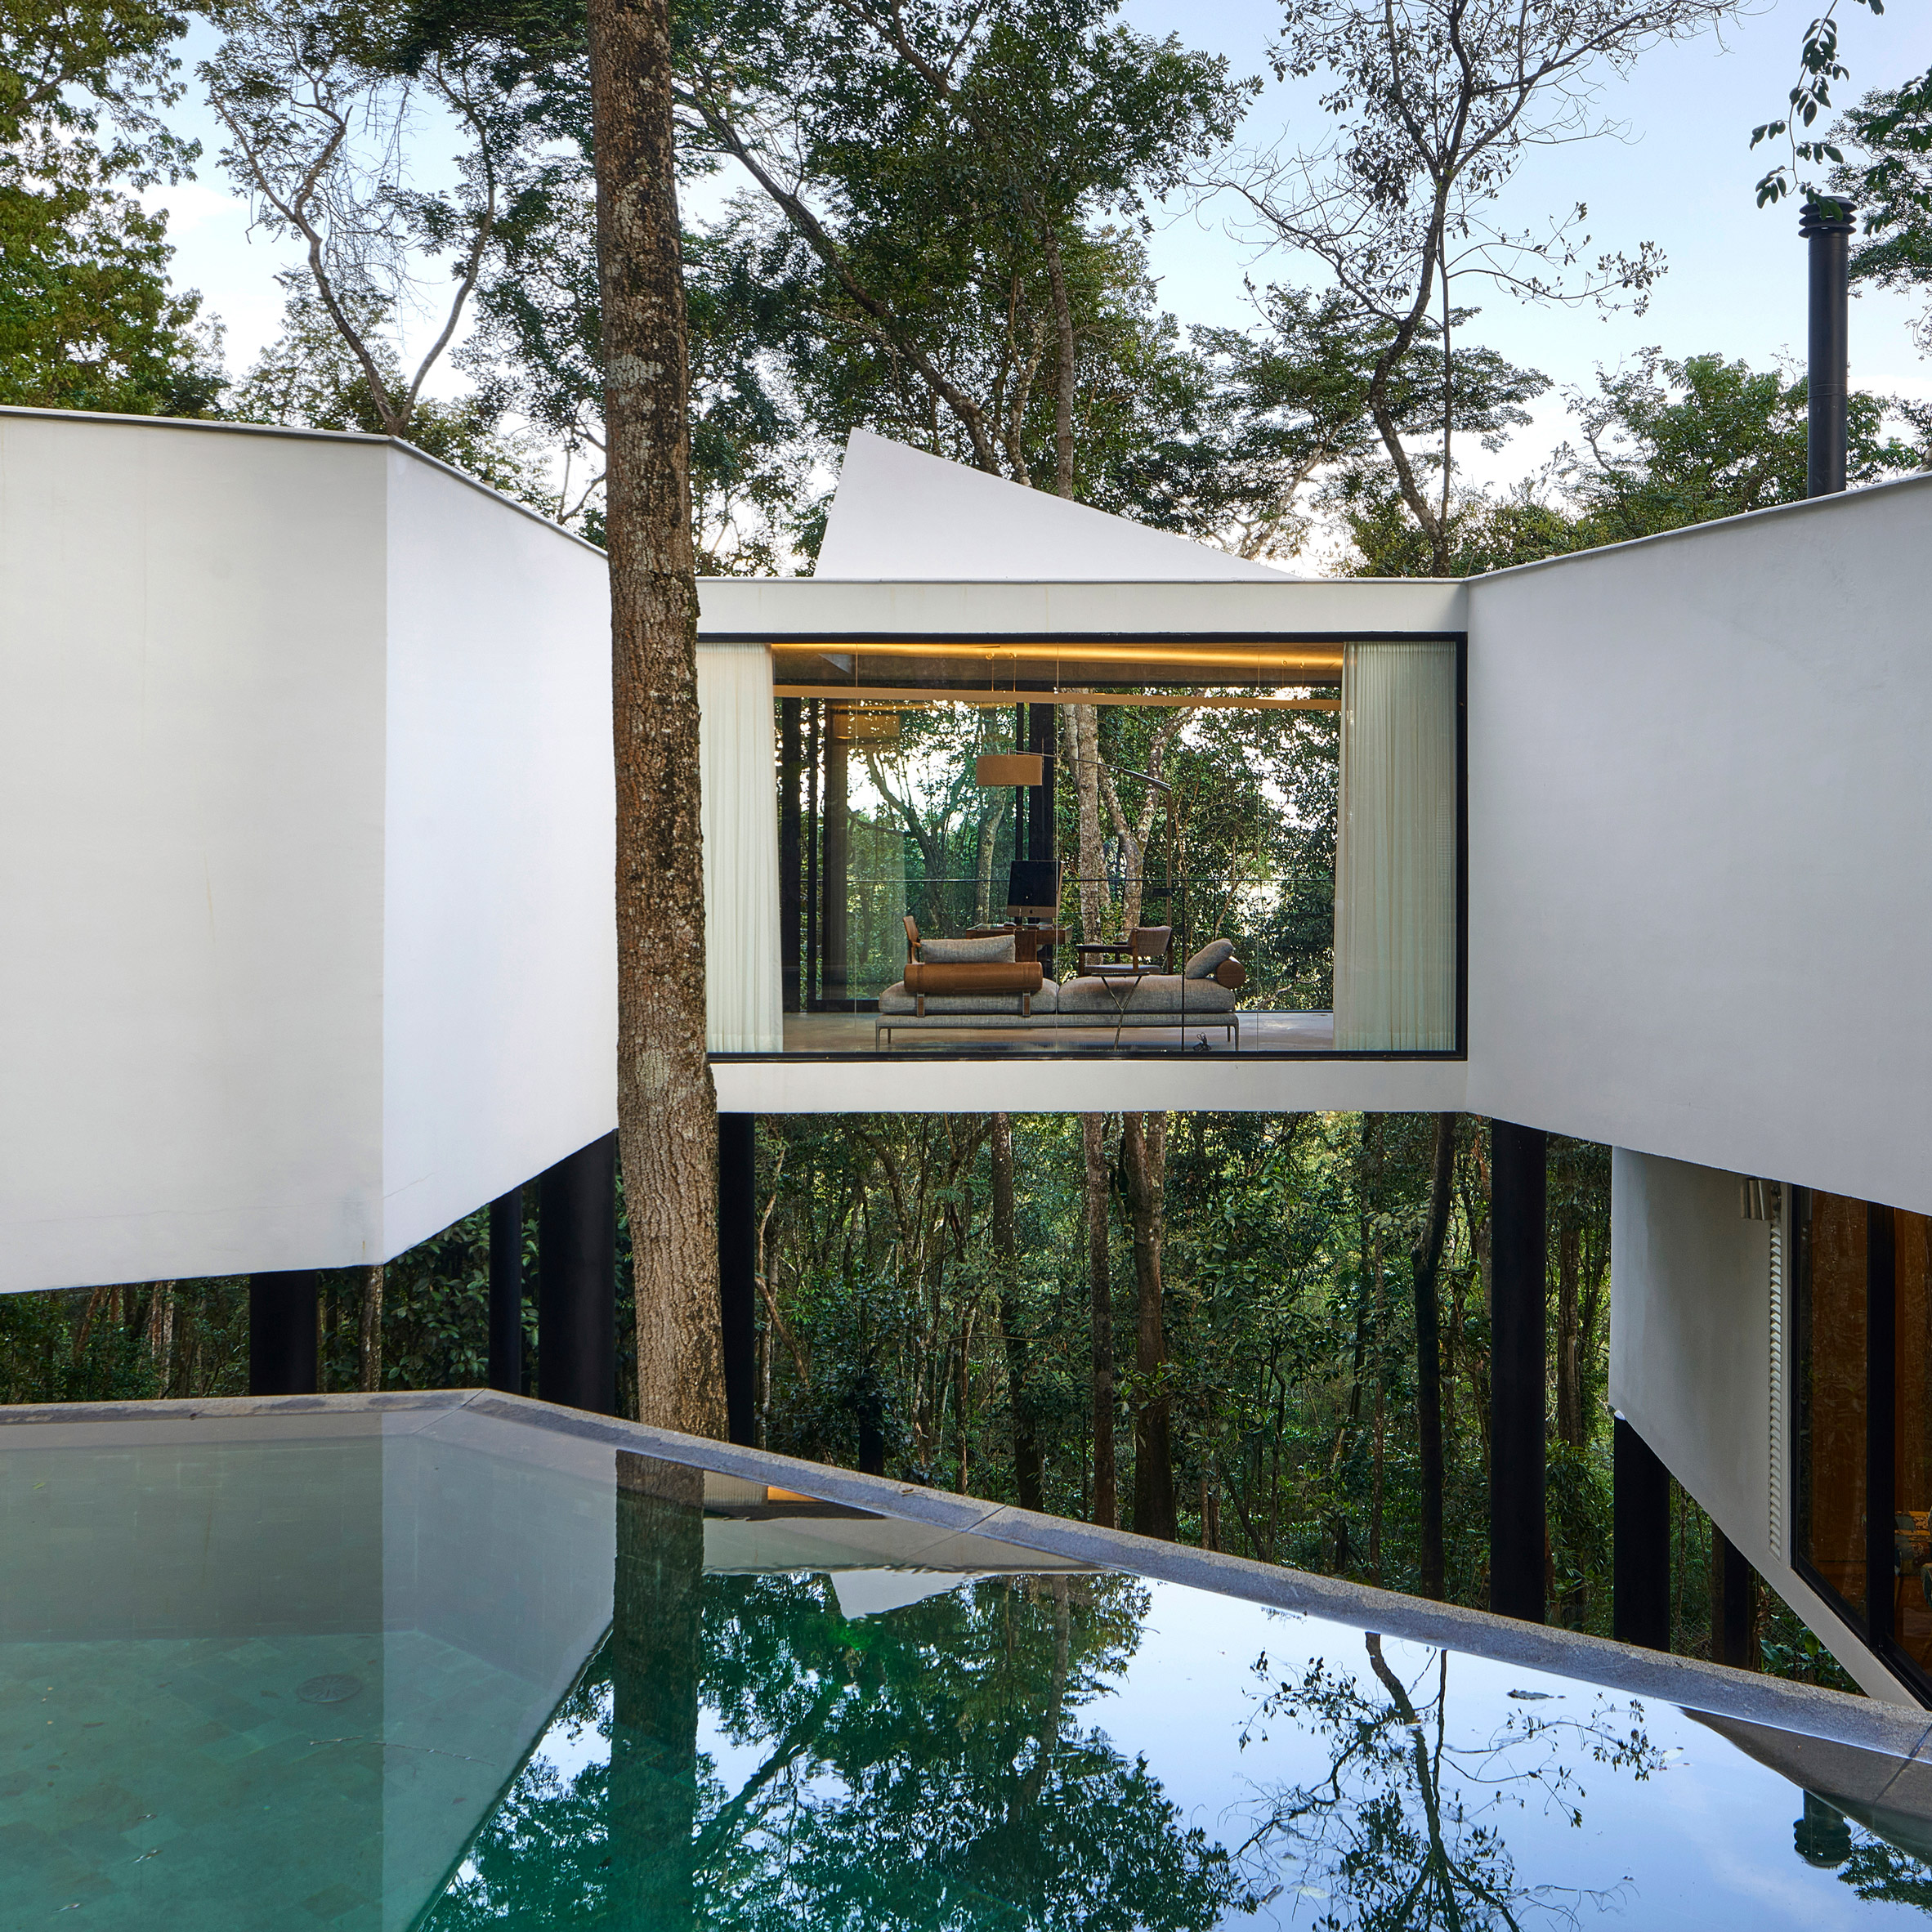 Elevated white building in the treetops with a large window looking into a living area